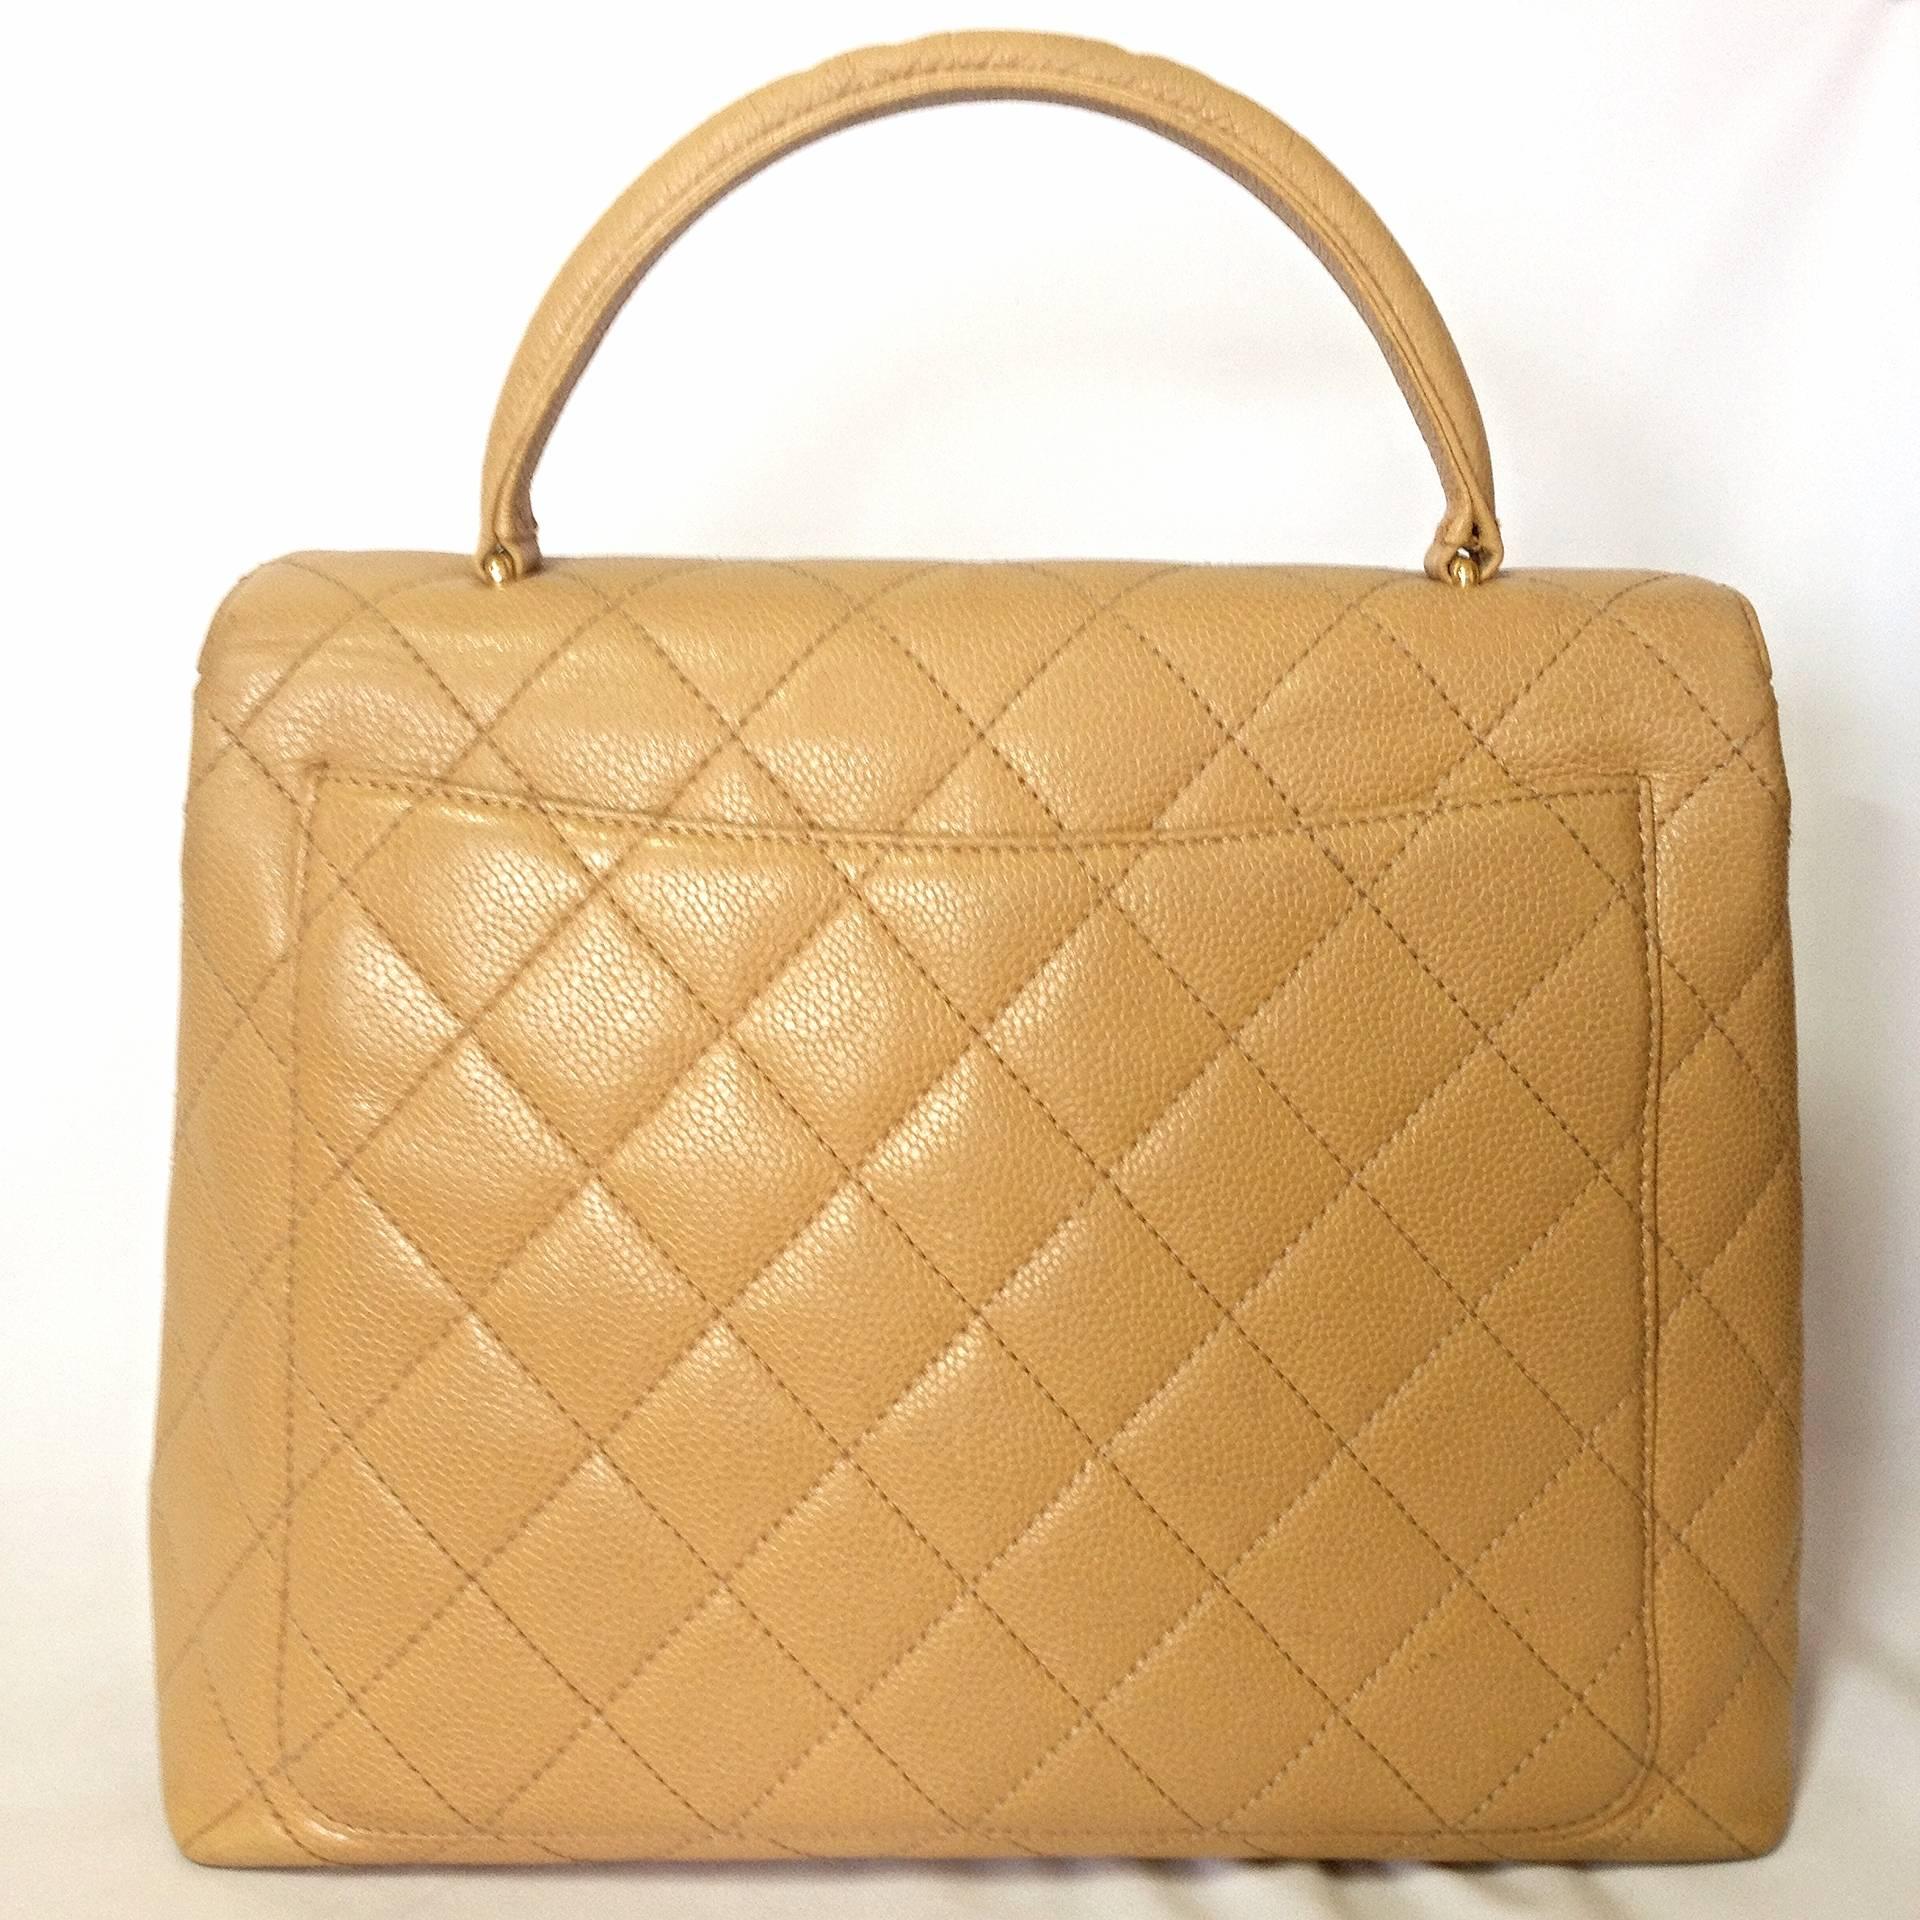 Vintage CHANEL beige brown caviar leather kelly handbag with golden CC closure. Classic large purse. 

Introducing another masterpiece, classic handbag in beige caviar leather from CHANEL back in the 90's. 
One of the most popular and classic